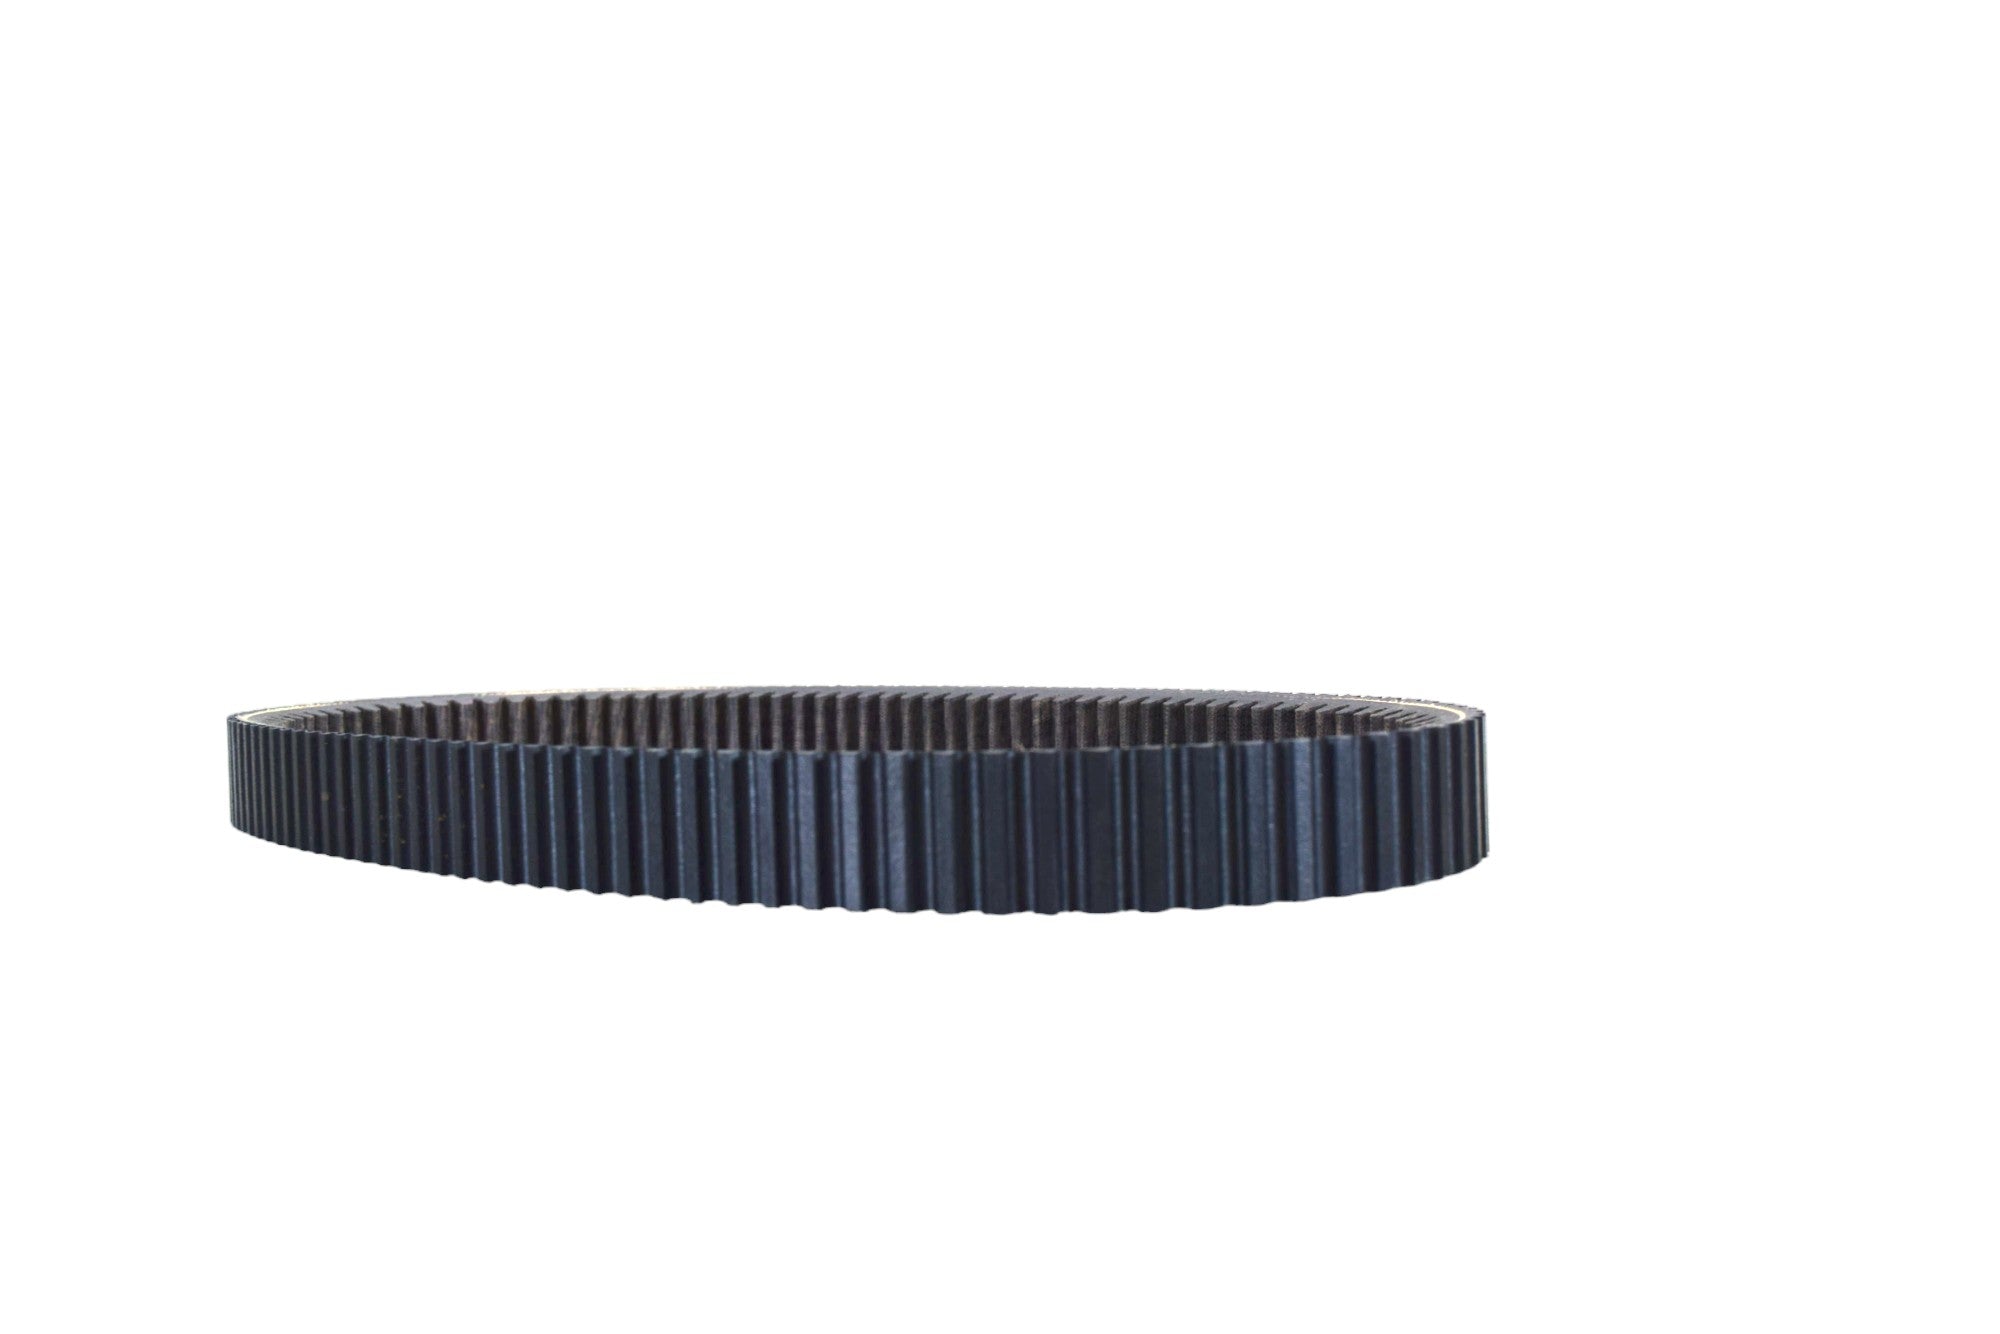 Ultimax UXP457 Drive Belt Polaris Ranger, RZR, and Ace OEM Replacement for 3211143, 3211169, 3211206 (Made in USA)